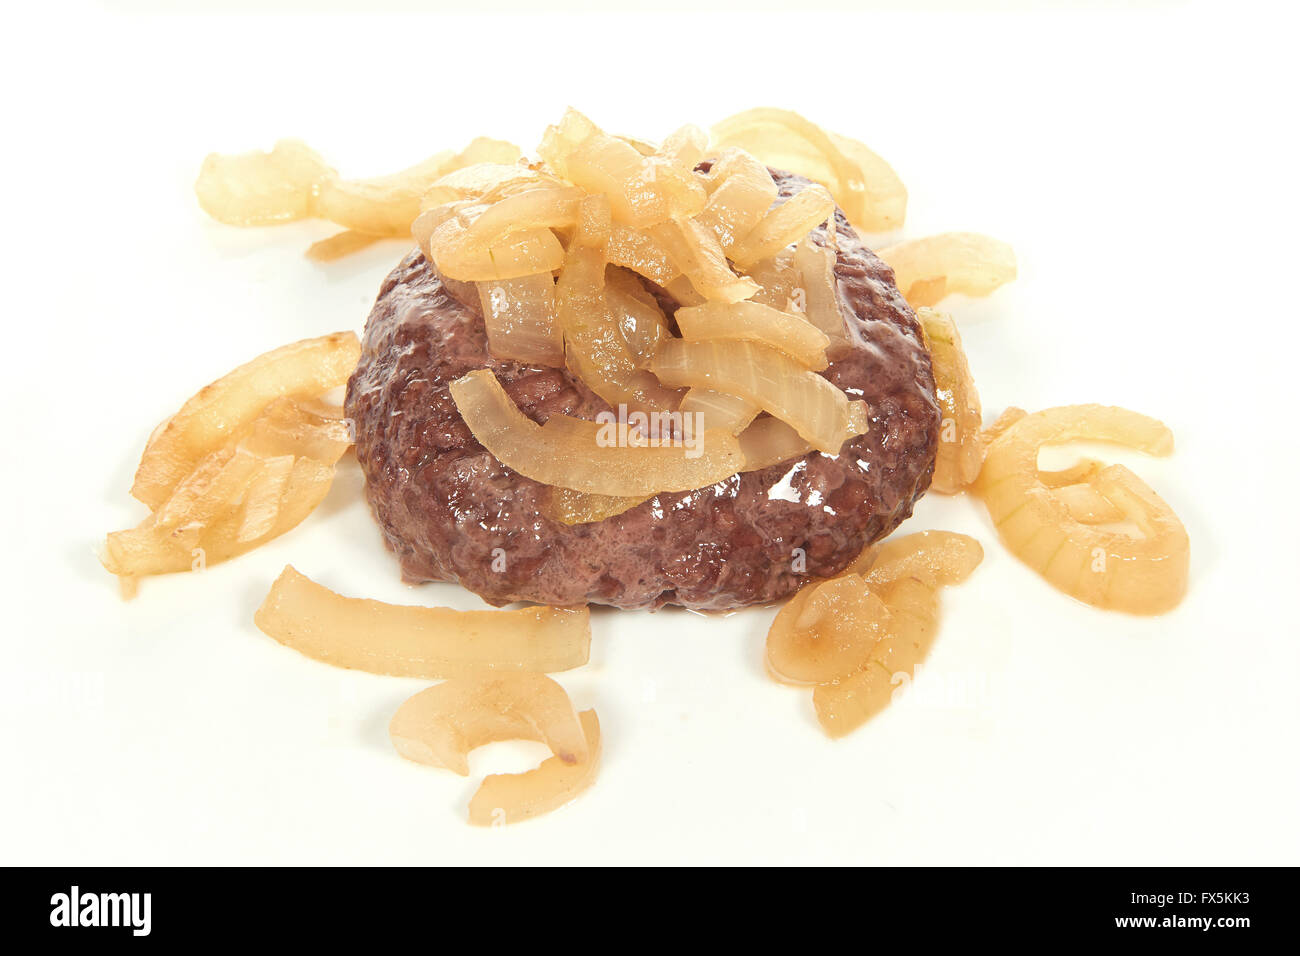 Minced meat steak with fried onions on top Stock Photo